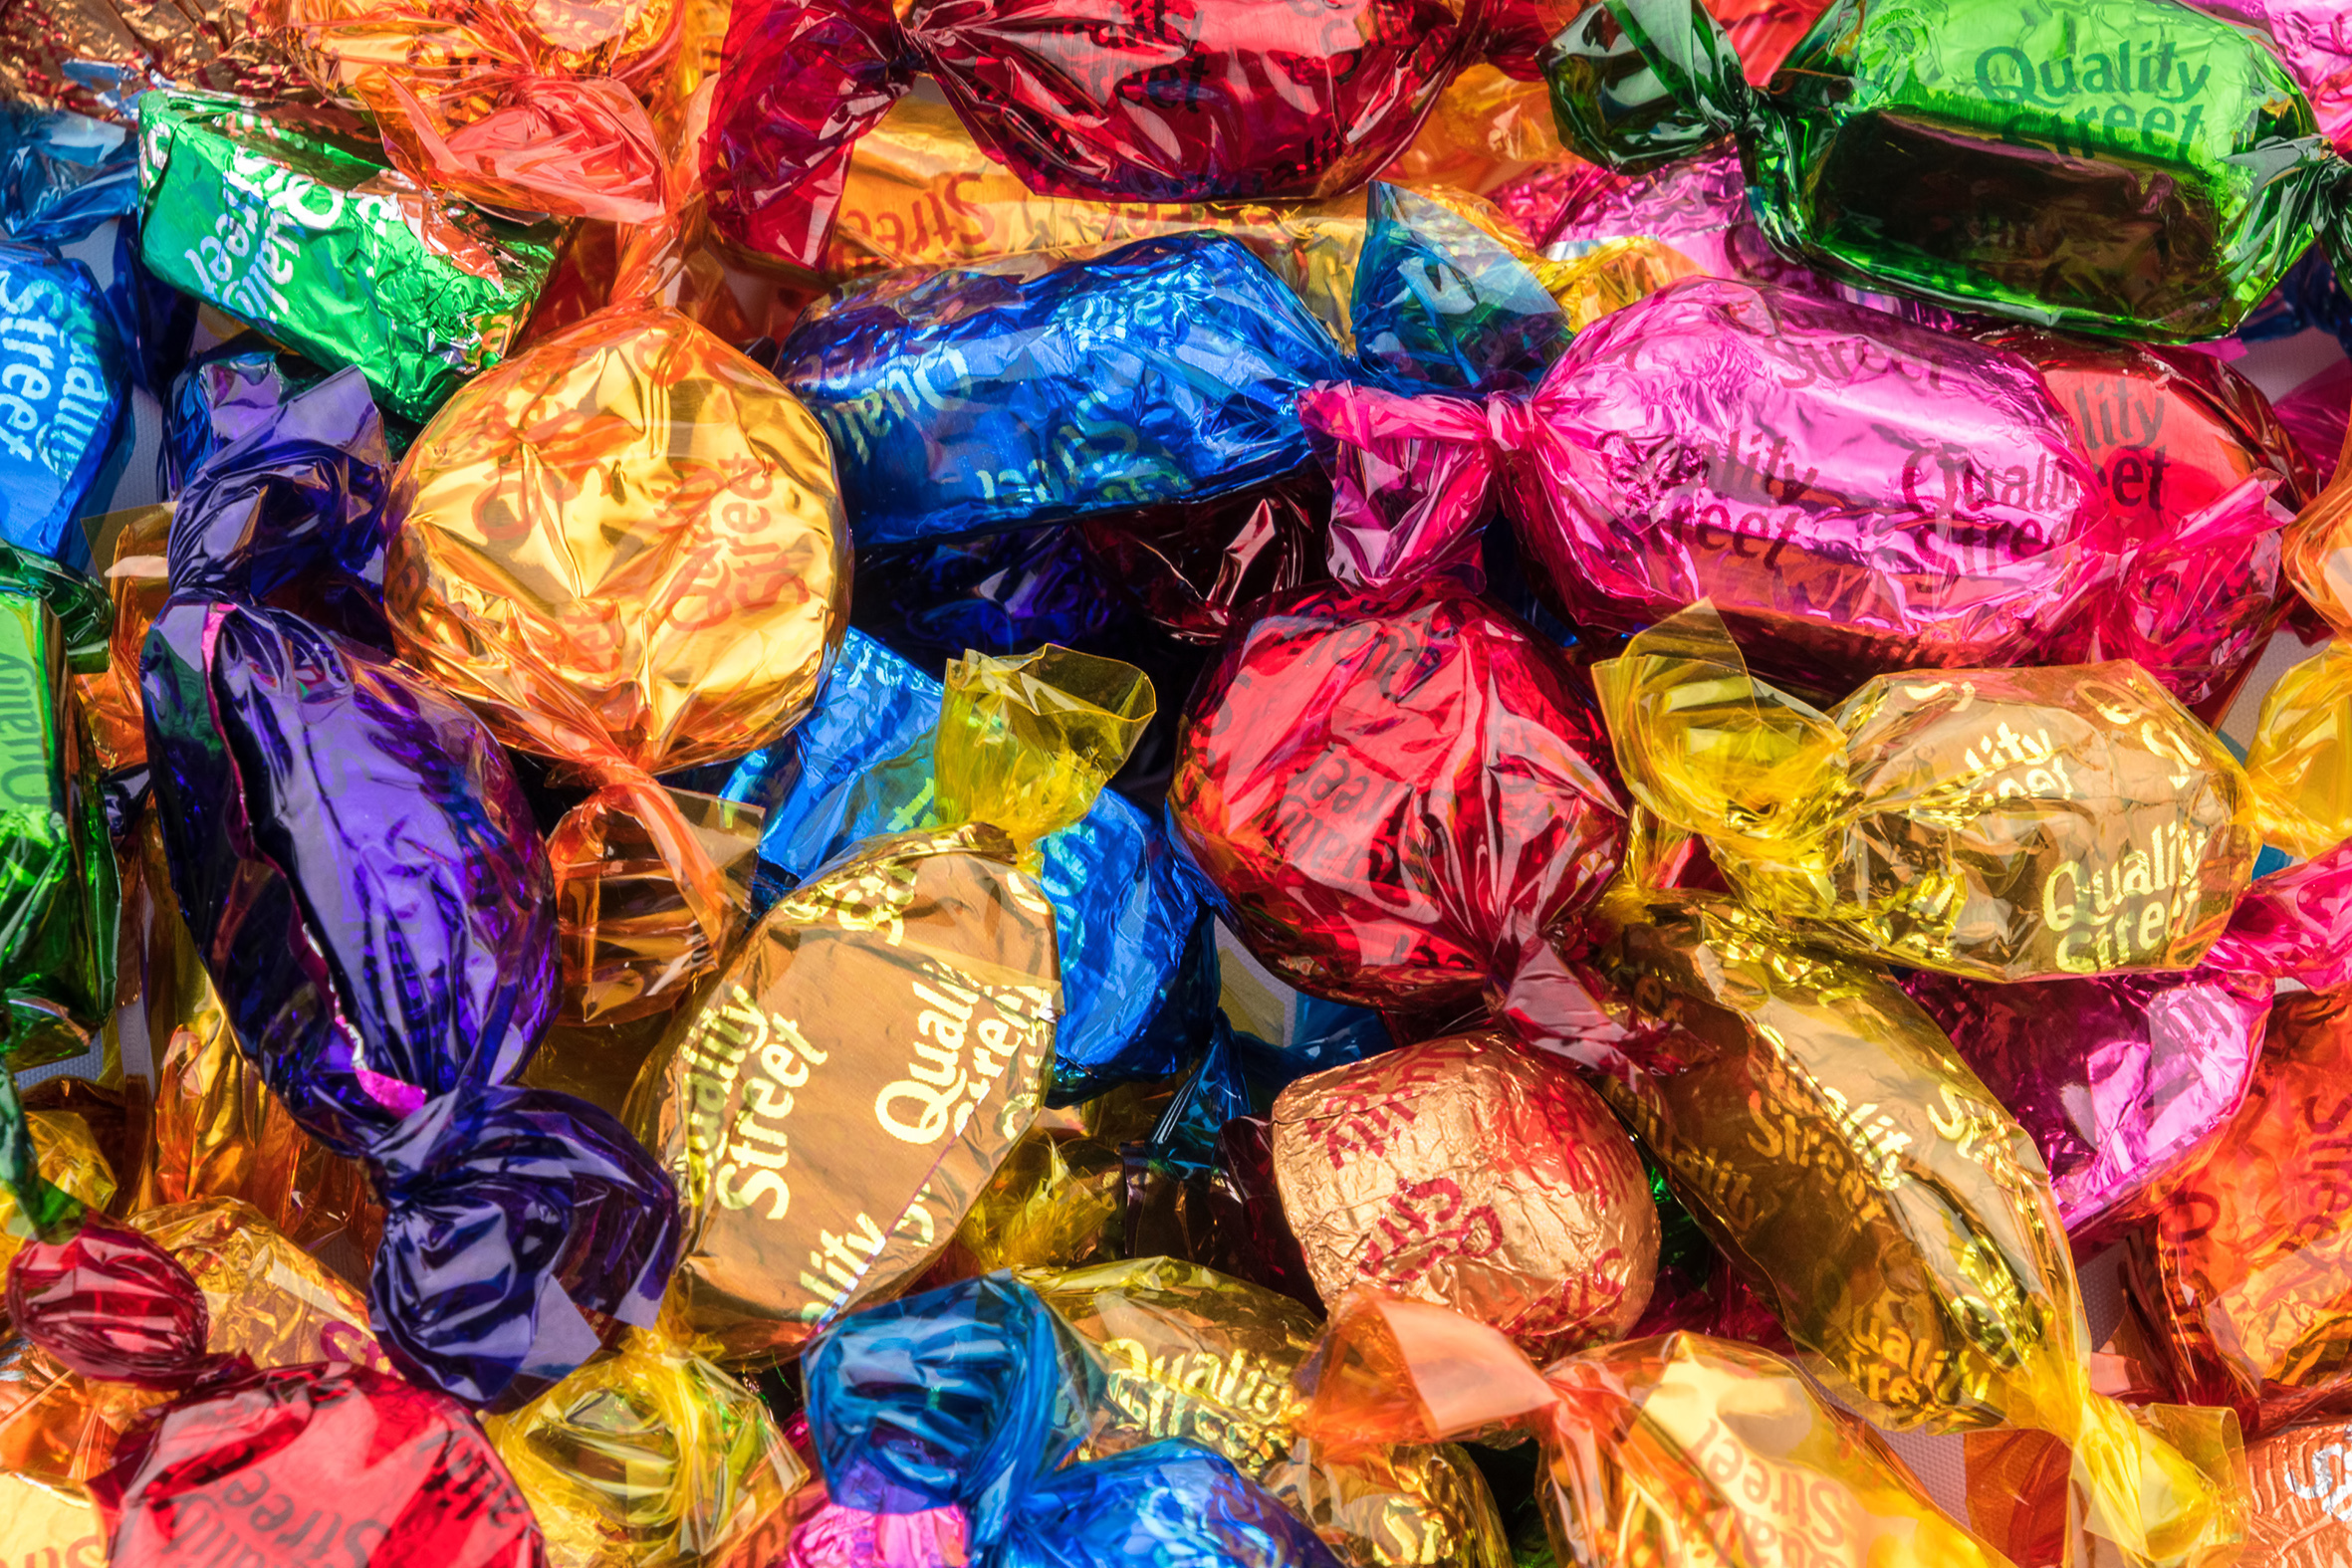 Vote, for your favourite Quality Street